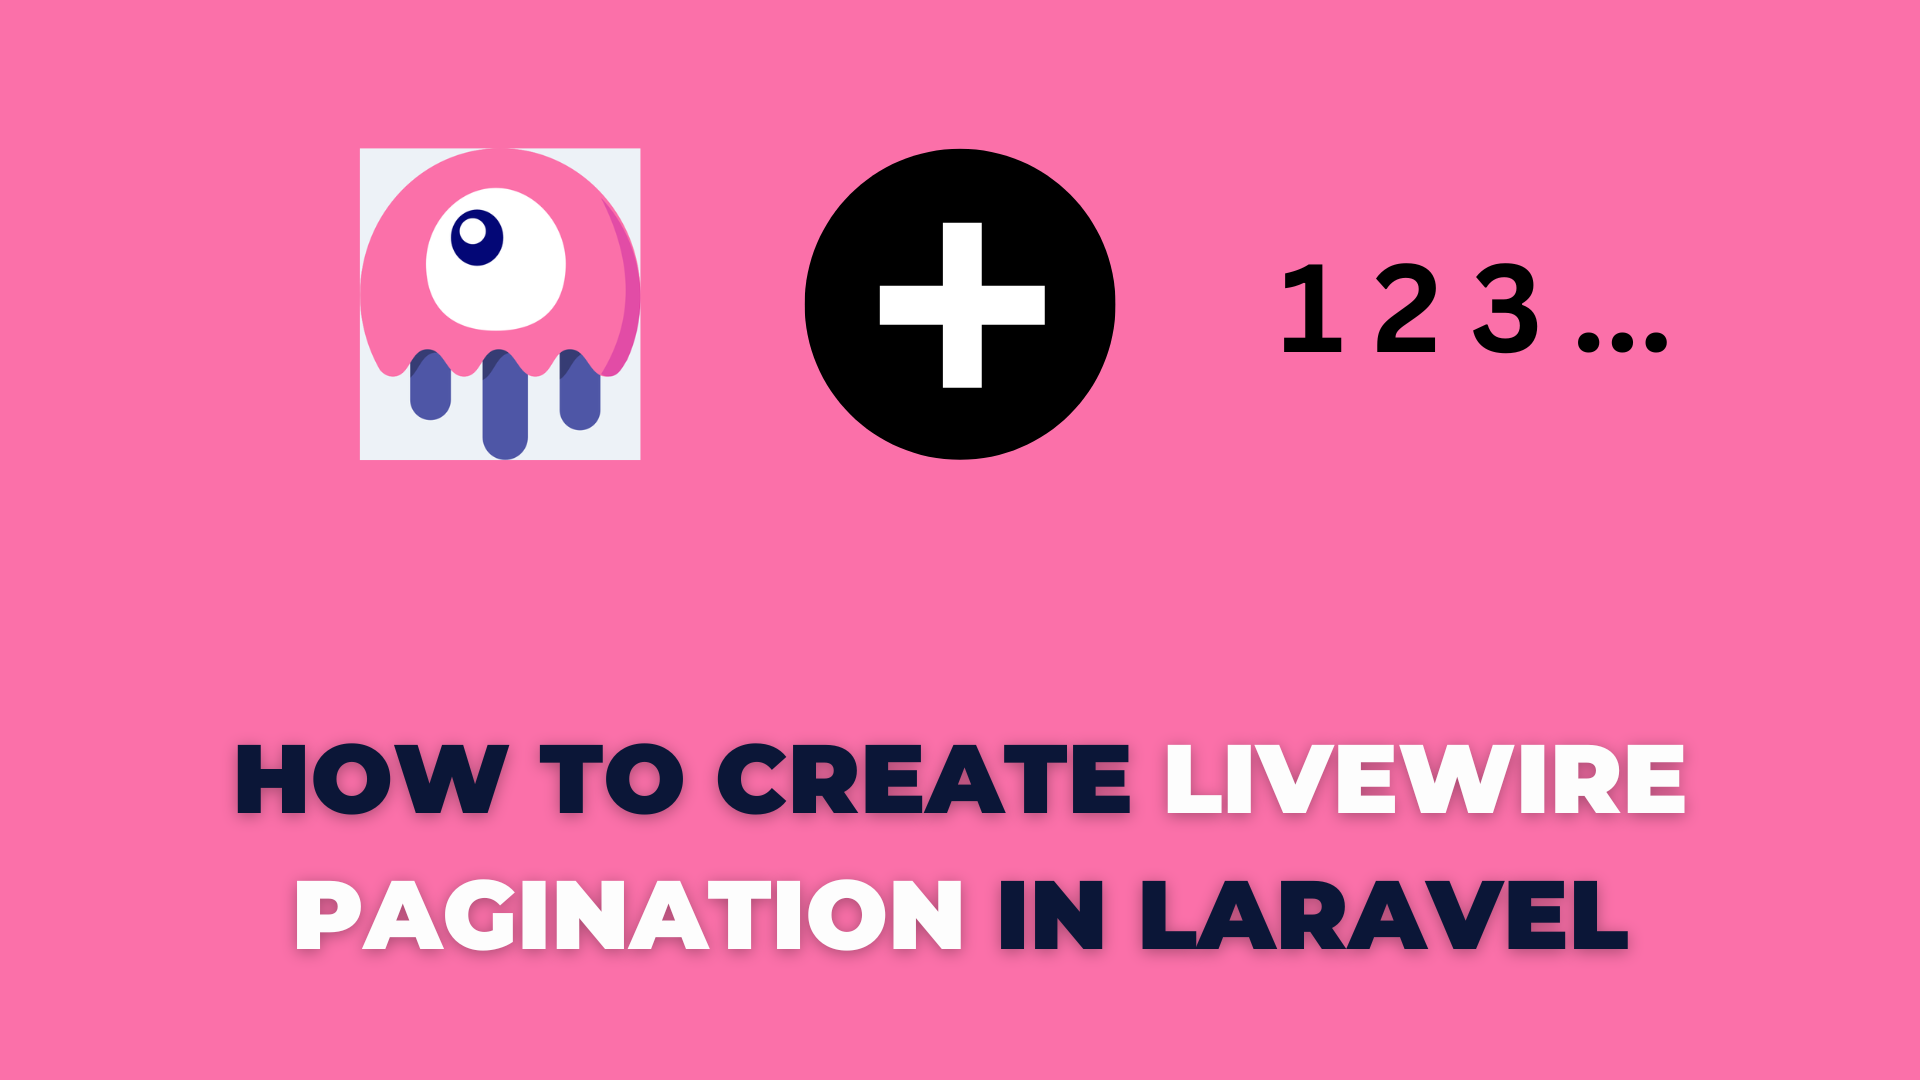 How to create Livewire Pagination in Laravel